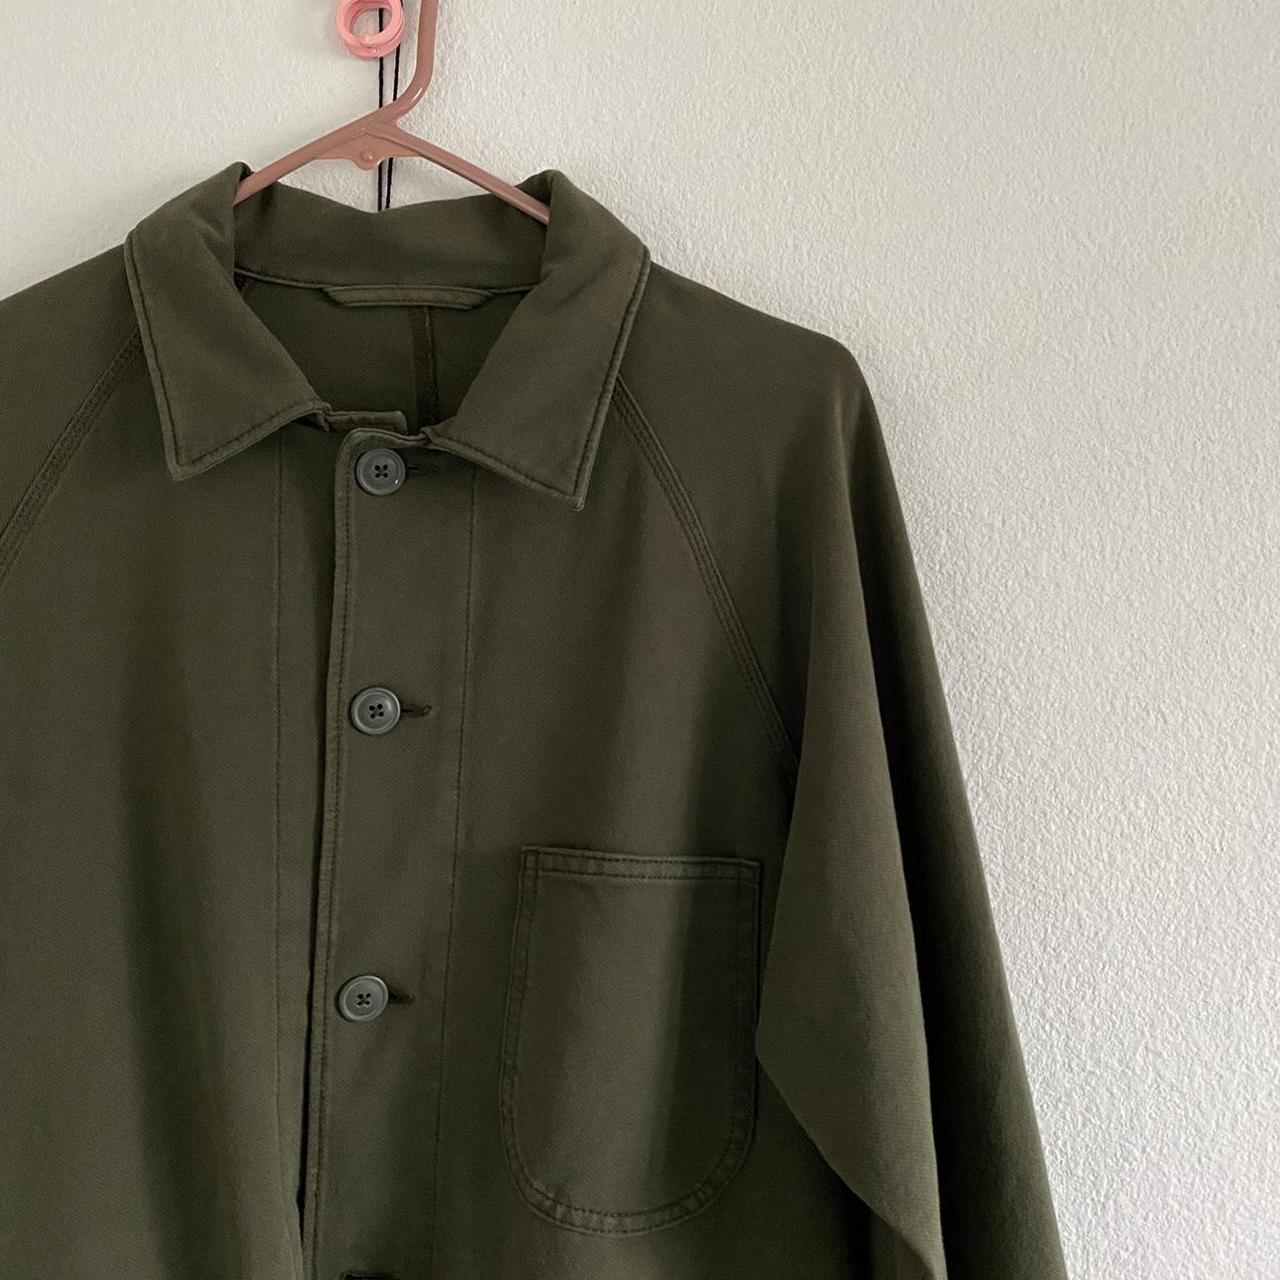 Uniqlo Chore jacket Size Small fits S-M. Never... - Depop